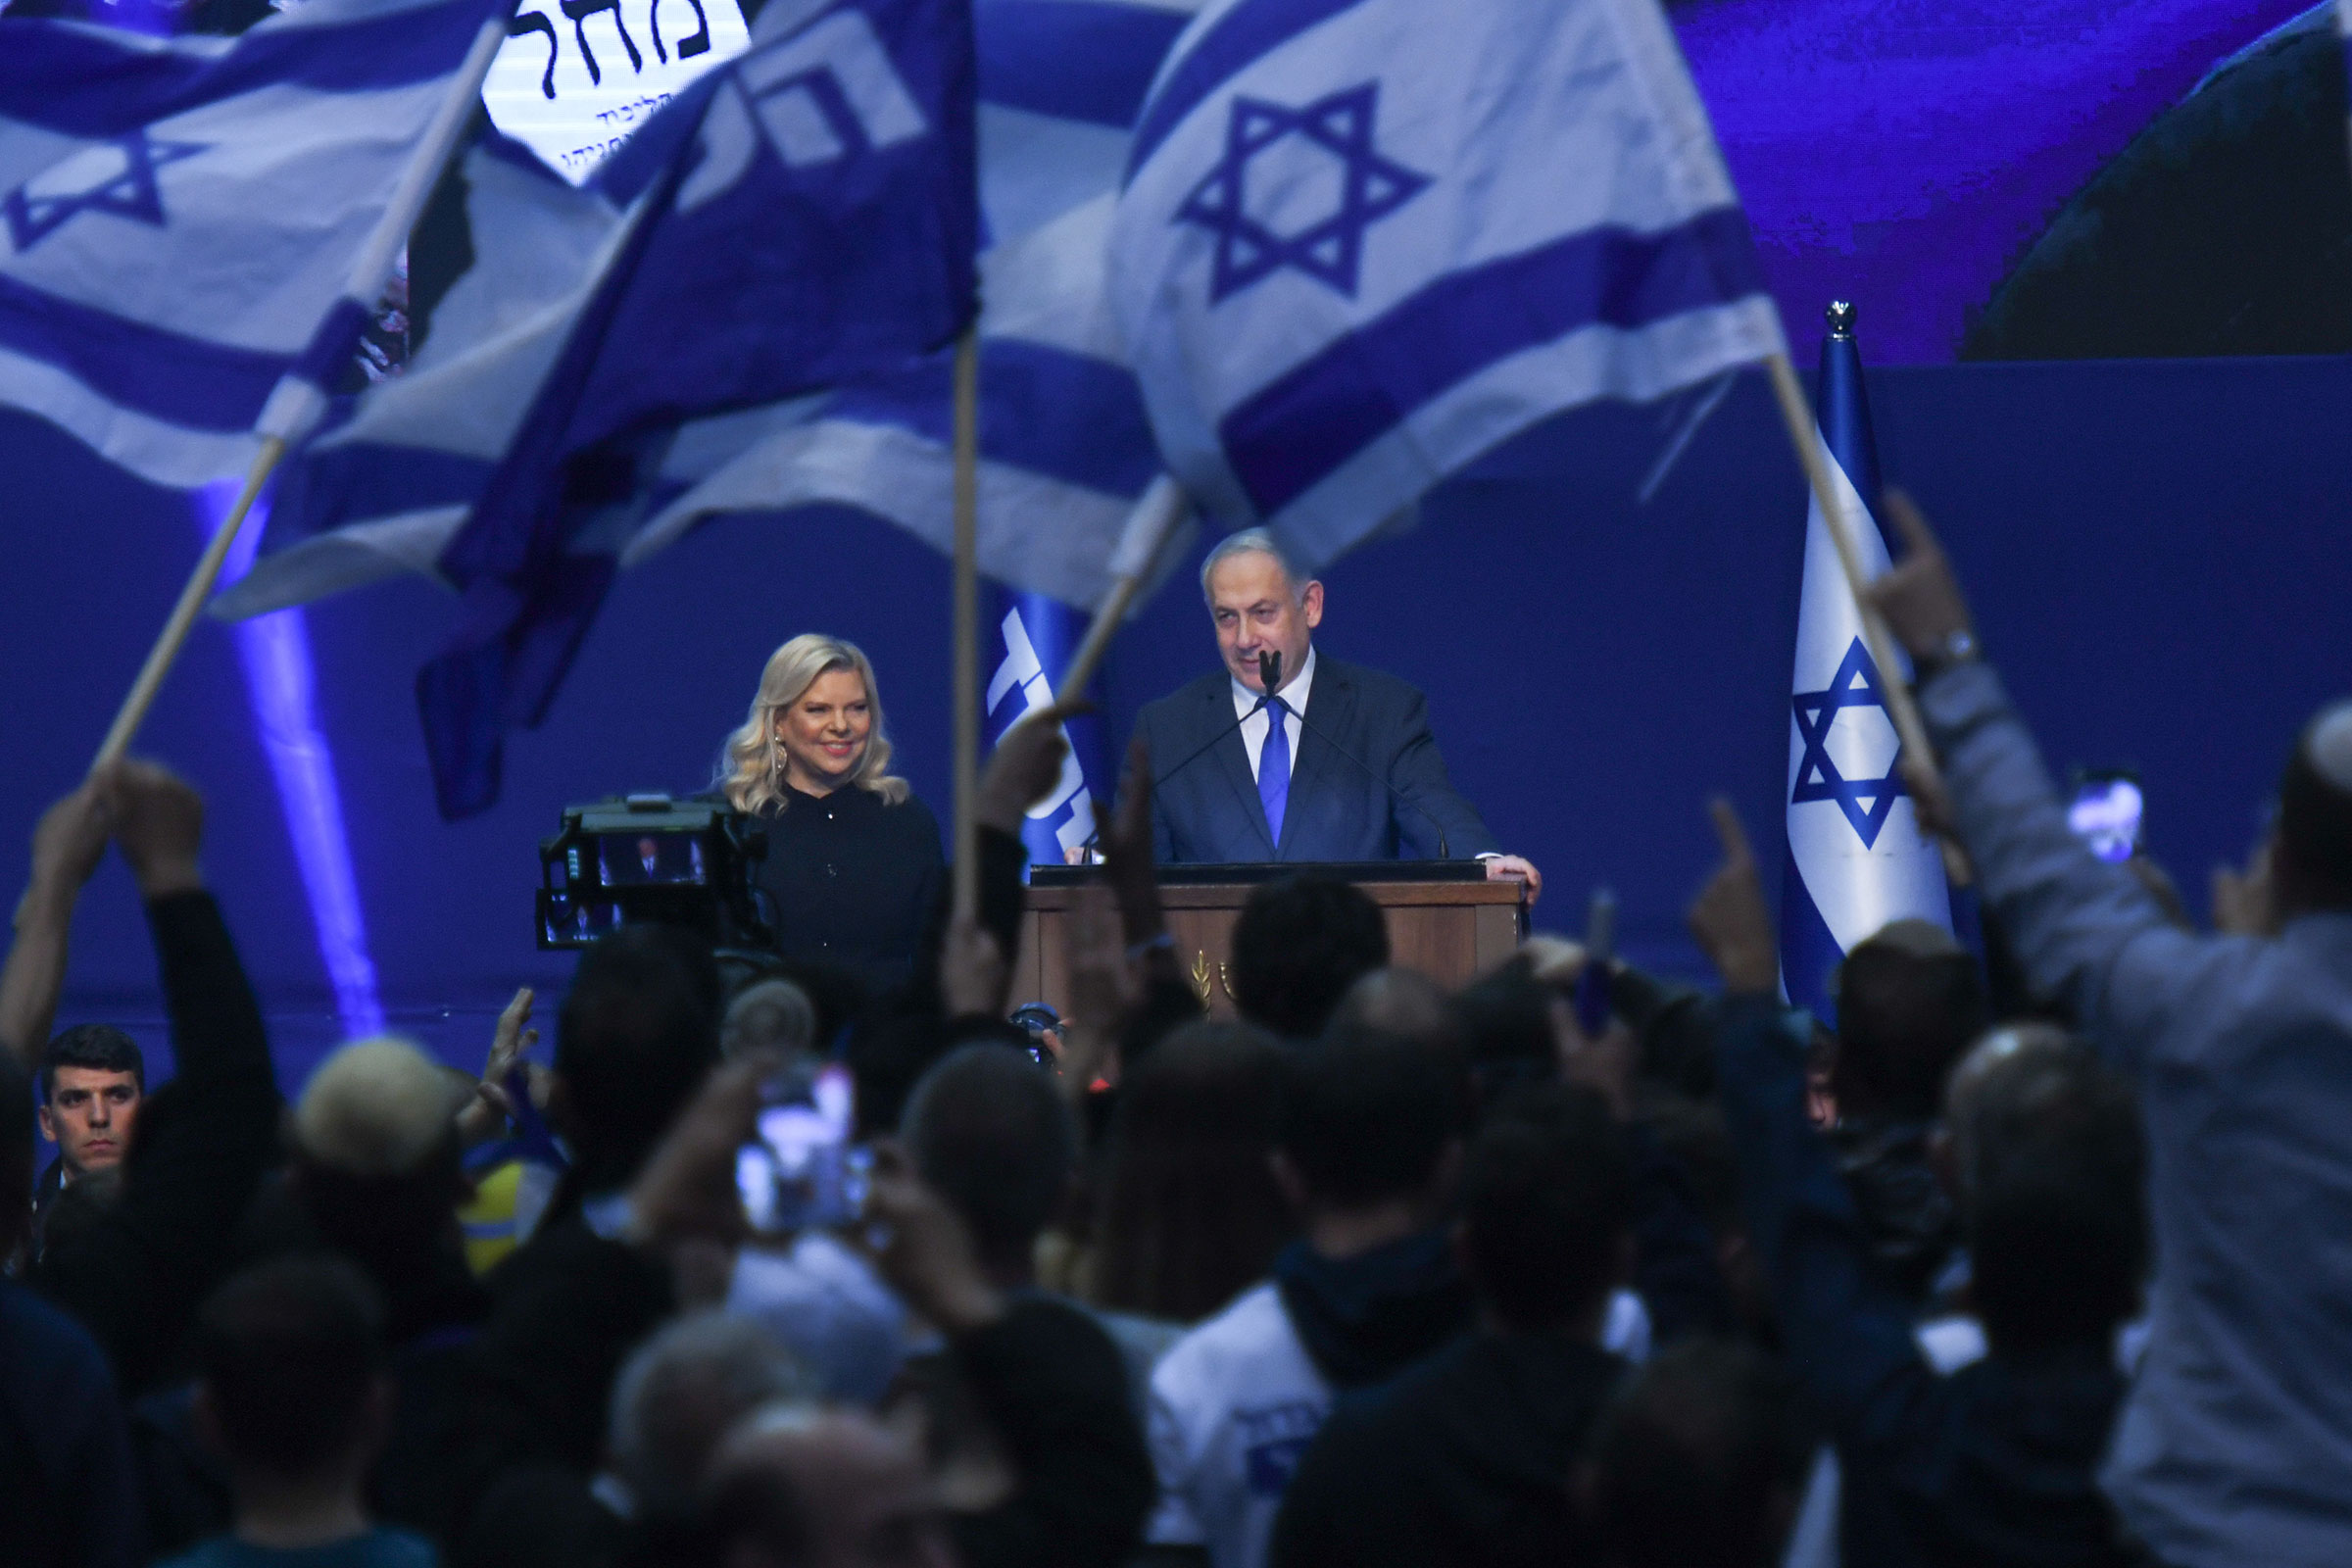 Israeli Prime Minister Benjamin Netanyahu stands next to his wife Sara as he speaks to supporters following the announcement of exit polls in Israel's election at his Likud party headquarters in Tel Aviv. on March 3, 2020.